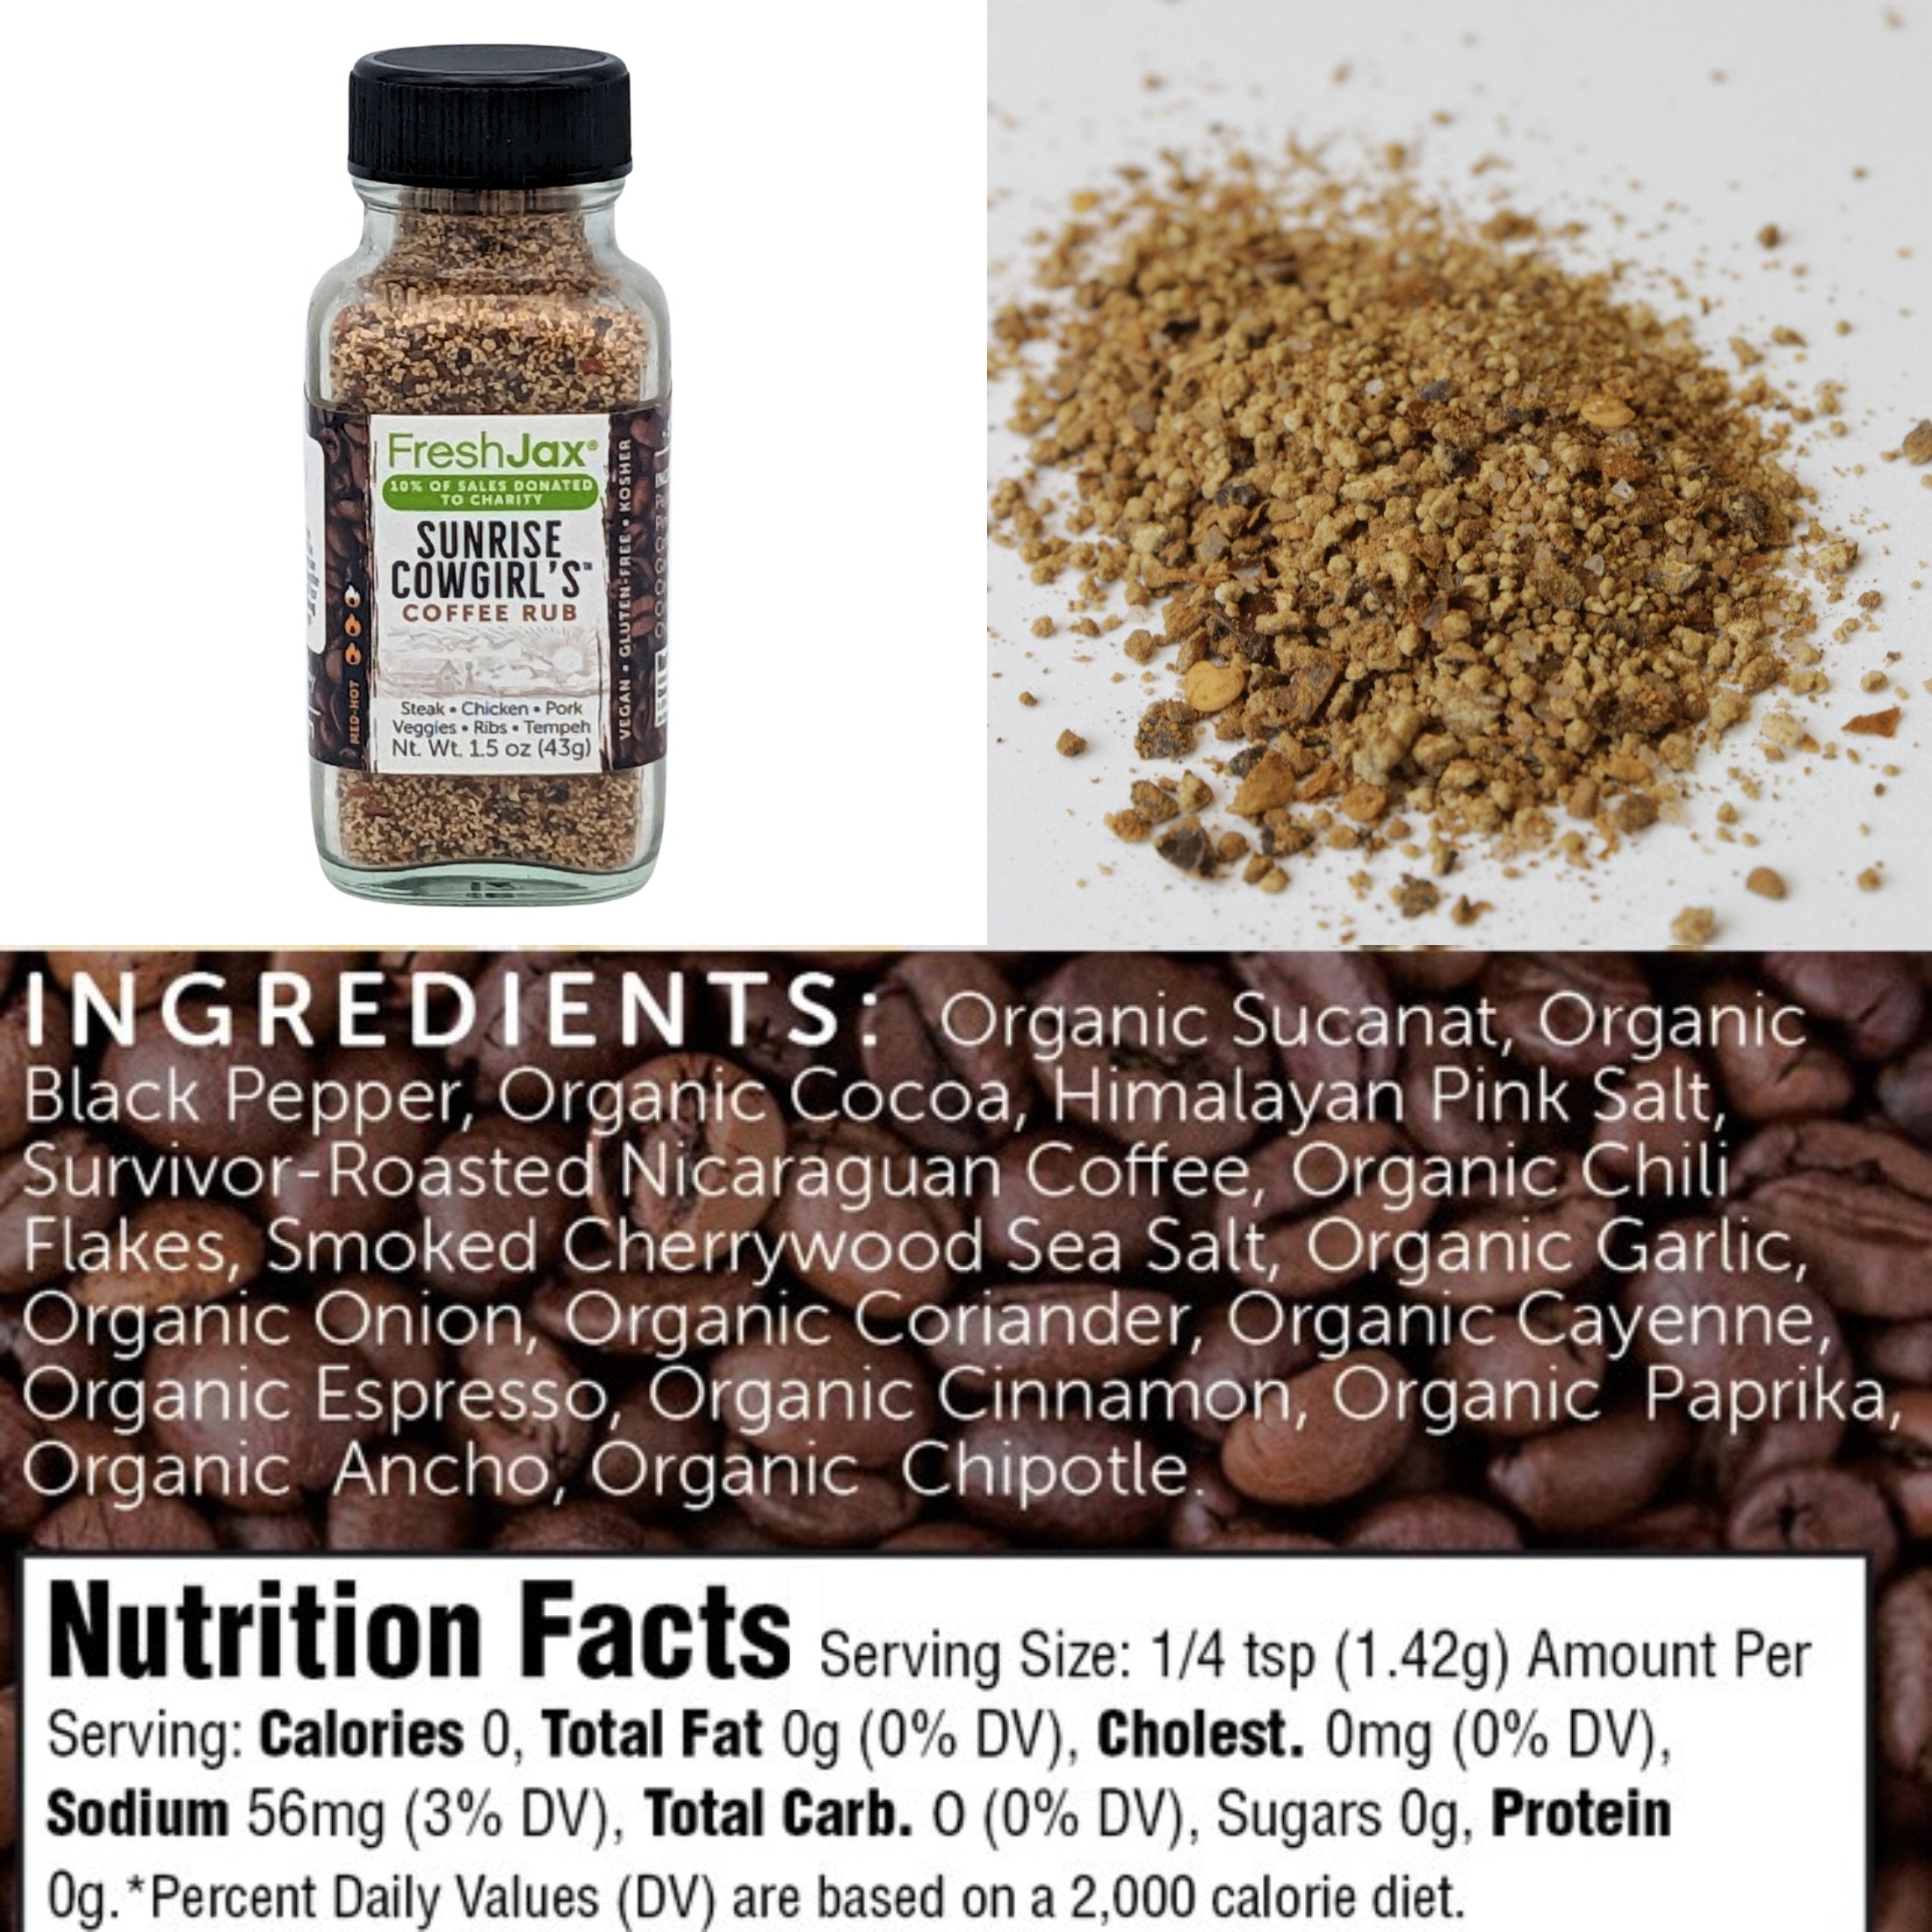 FreshJax Organic Spices Sunrise Cowgirl's Coffee Rub Ingredients and Nutritional Information